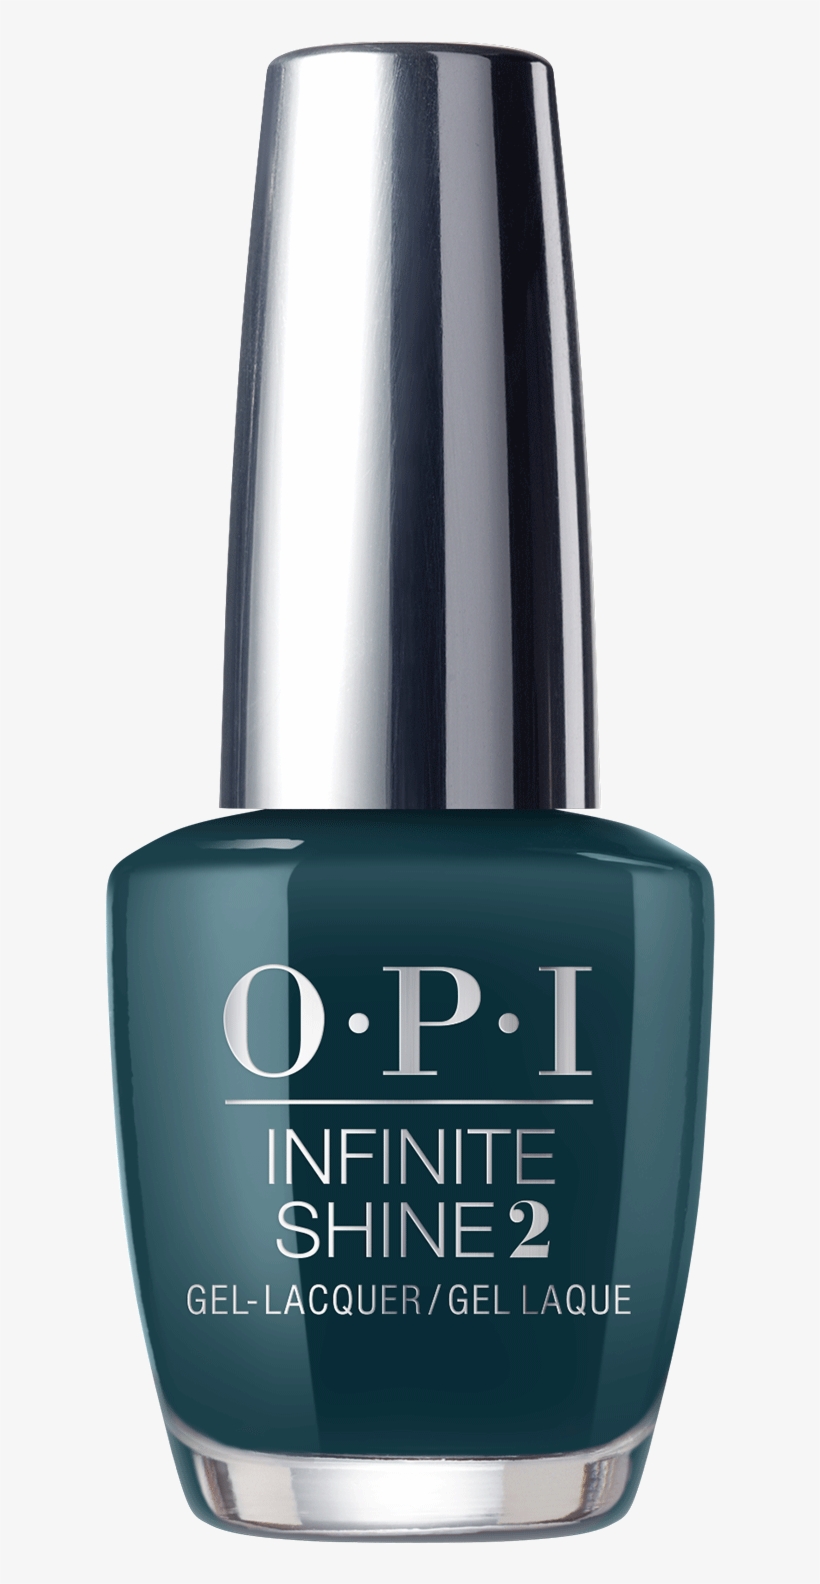 Cia= Color Is Awesome - Opi Infinite Shine In The Cable Car Pool Lane, transparent png #7761836